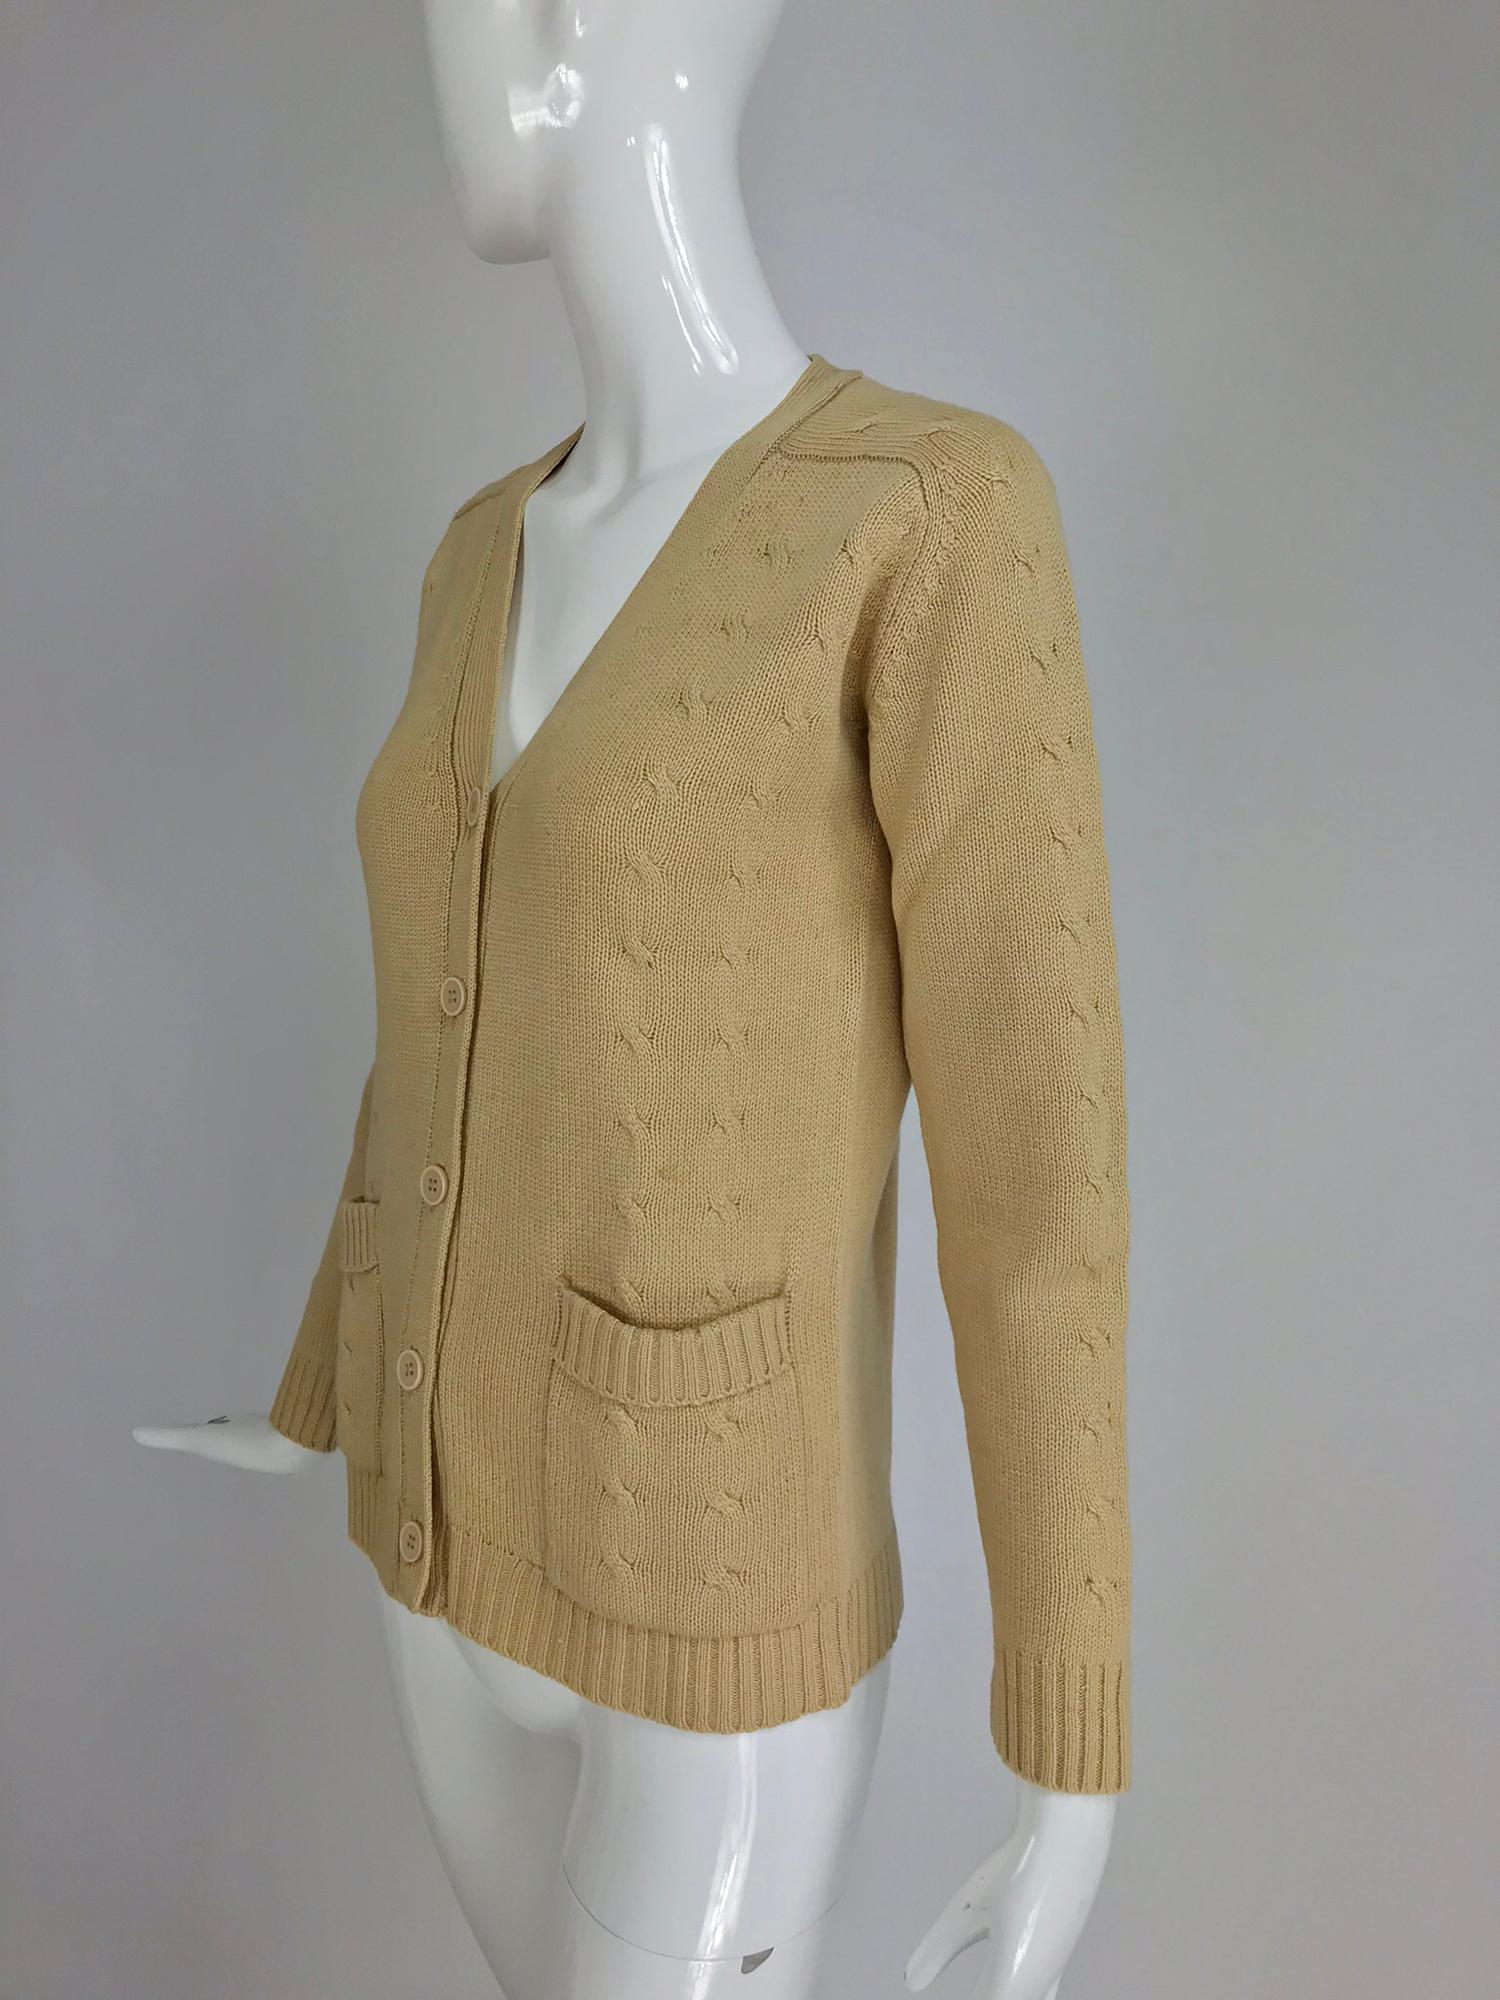 Hermes tan cashmere silk cable knit cardigan sweater 1960s For Sale 4